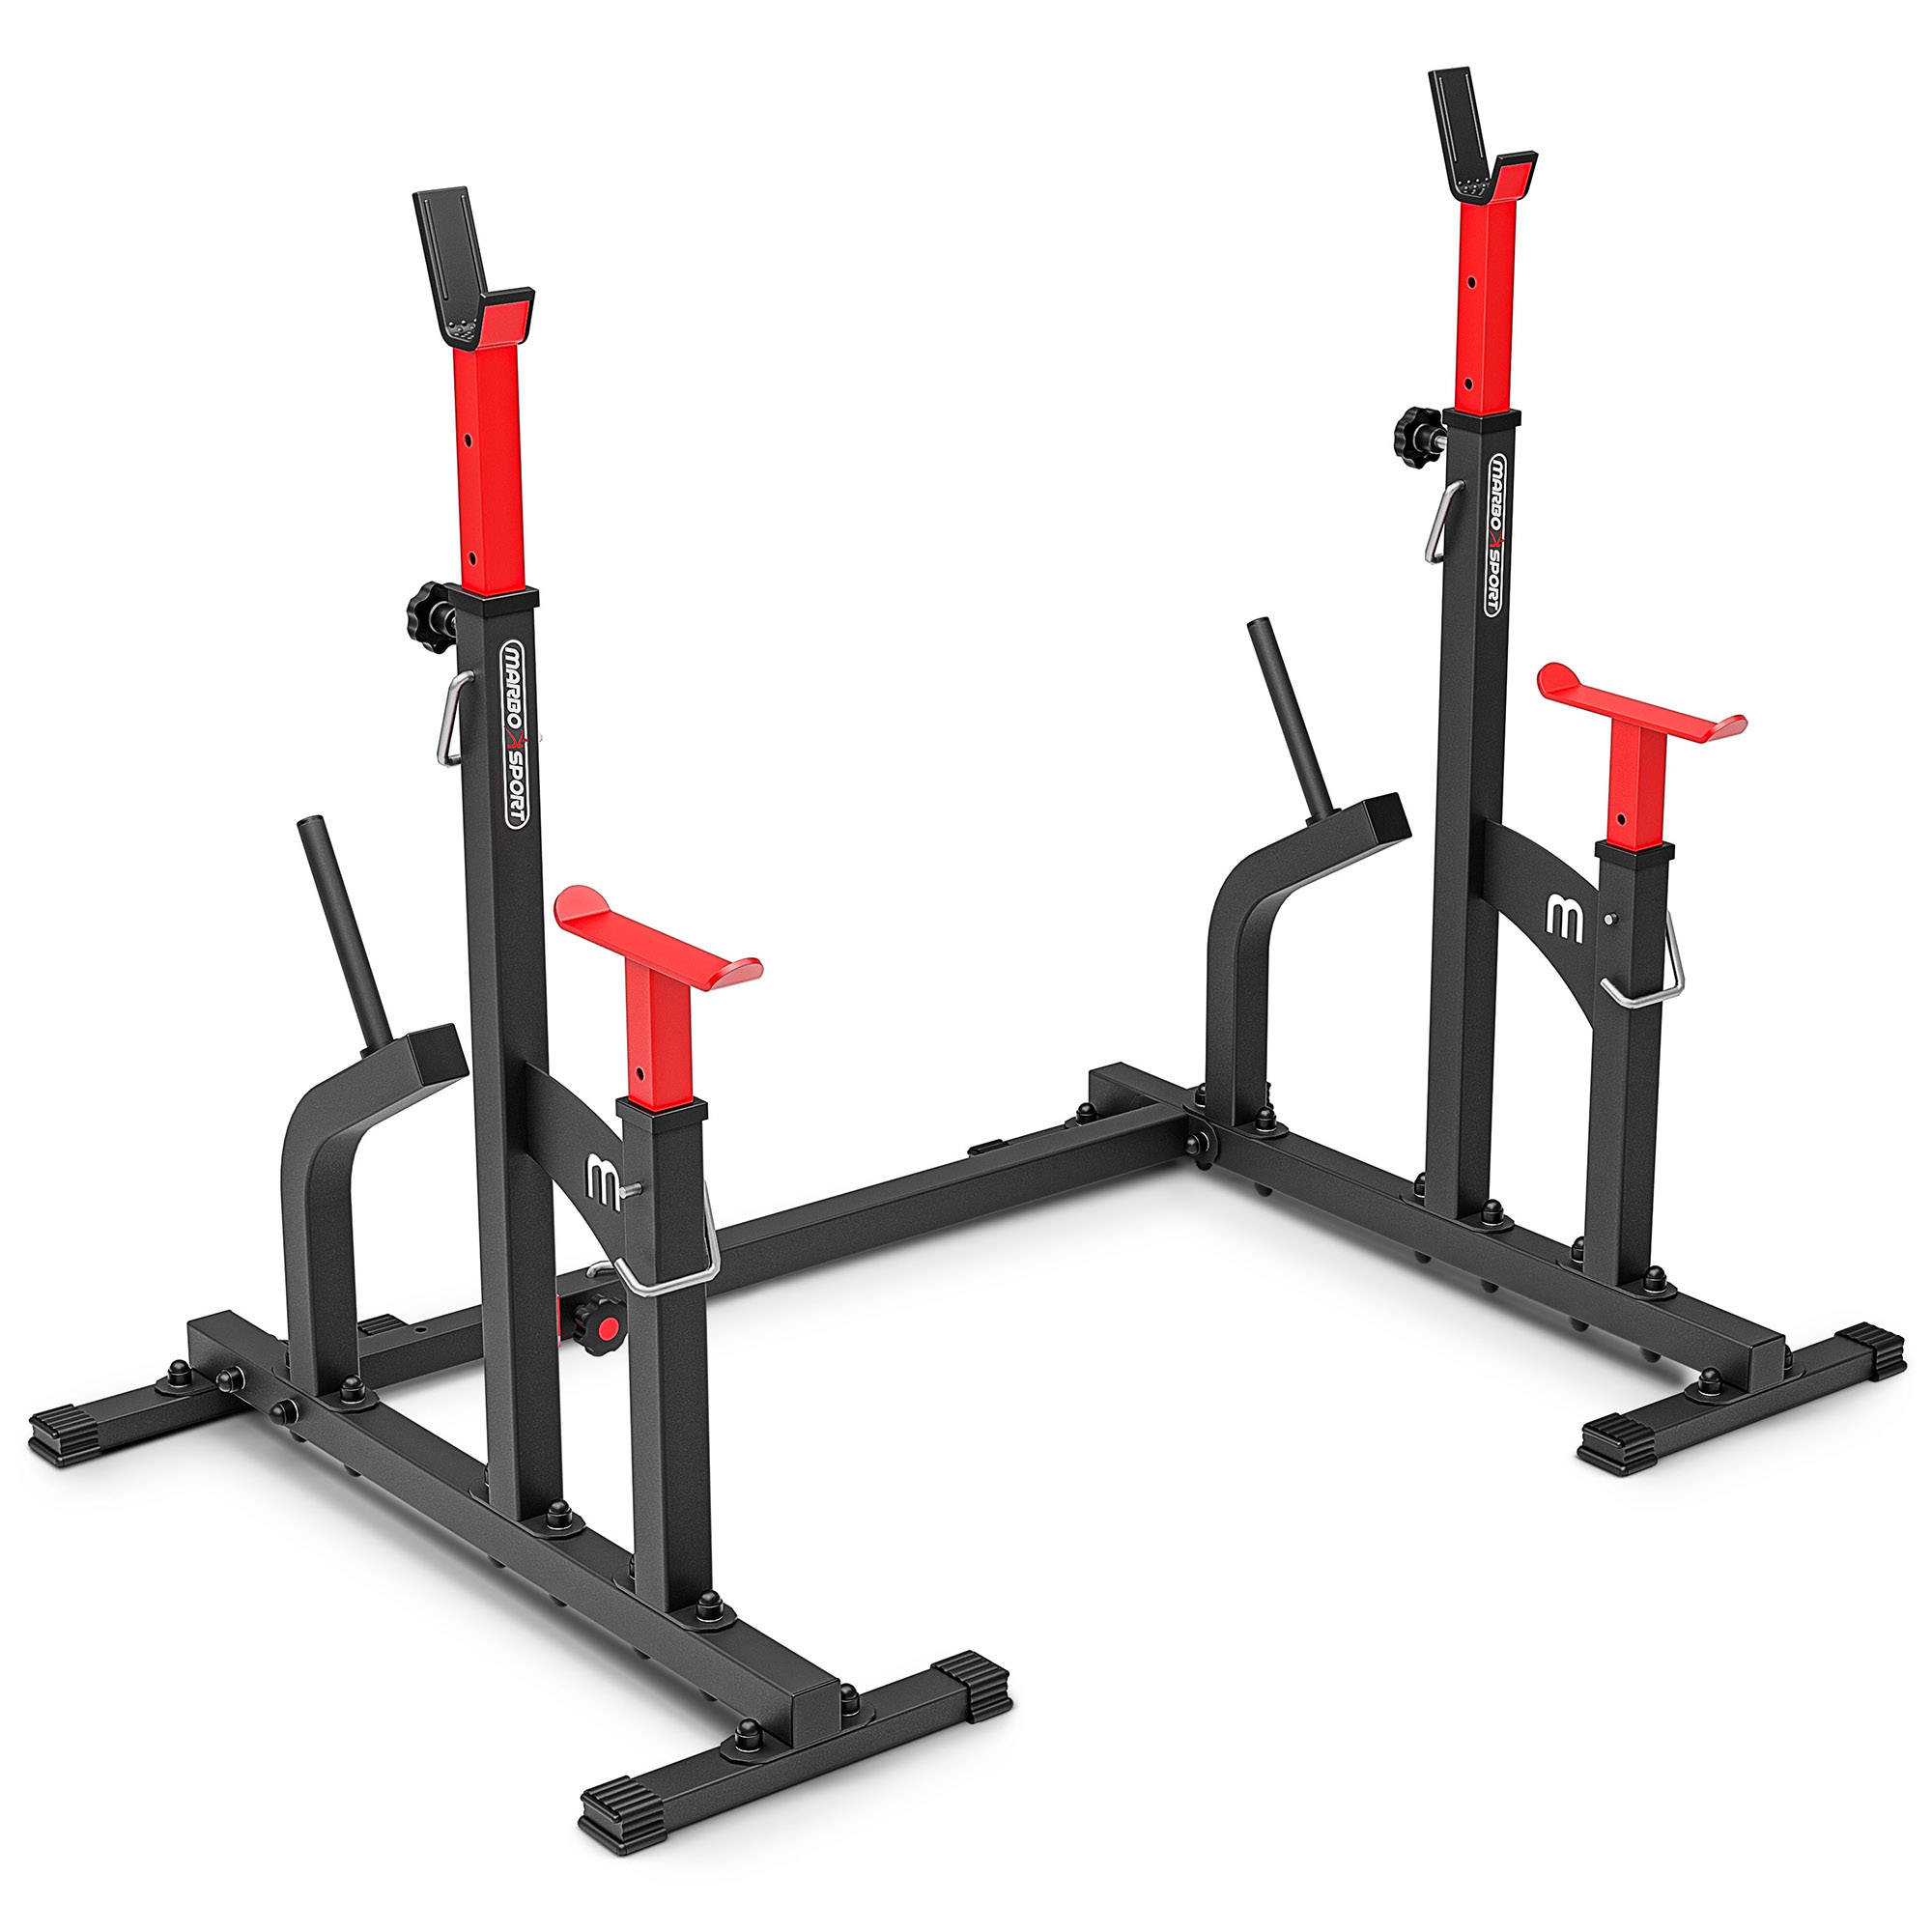 Set MS5_161KG_KIER_G | bench MS-L101 + Squat and dip rack with spotter catchers MS-S104 + Scott bench MS-L107 + reinforced bars and rubberized weights set 83 kg - Marbo rubberized